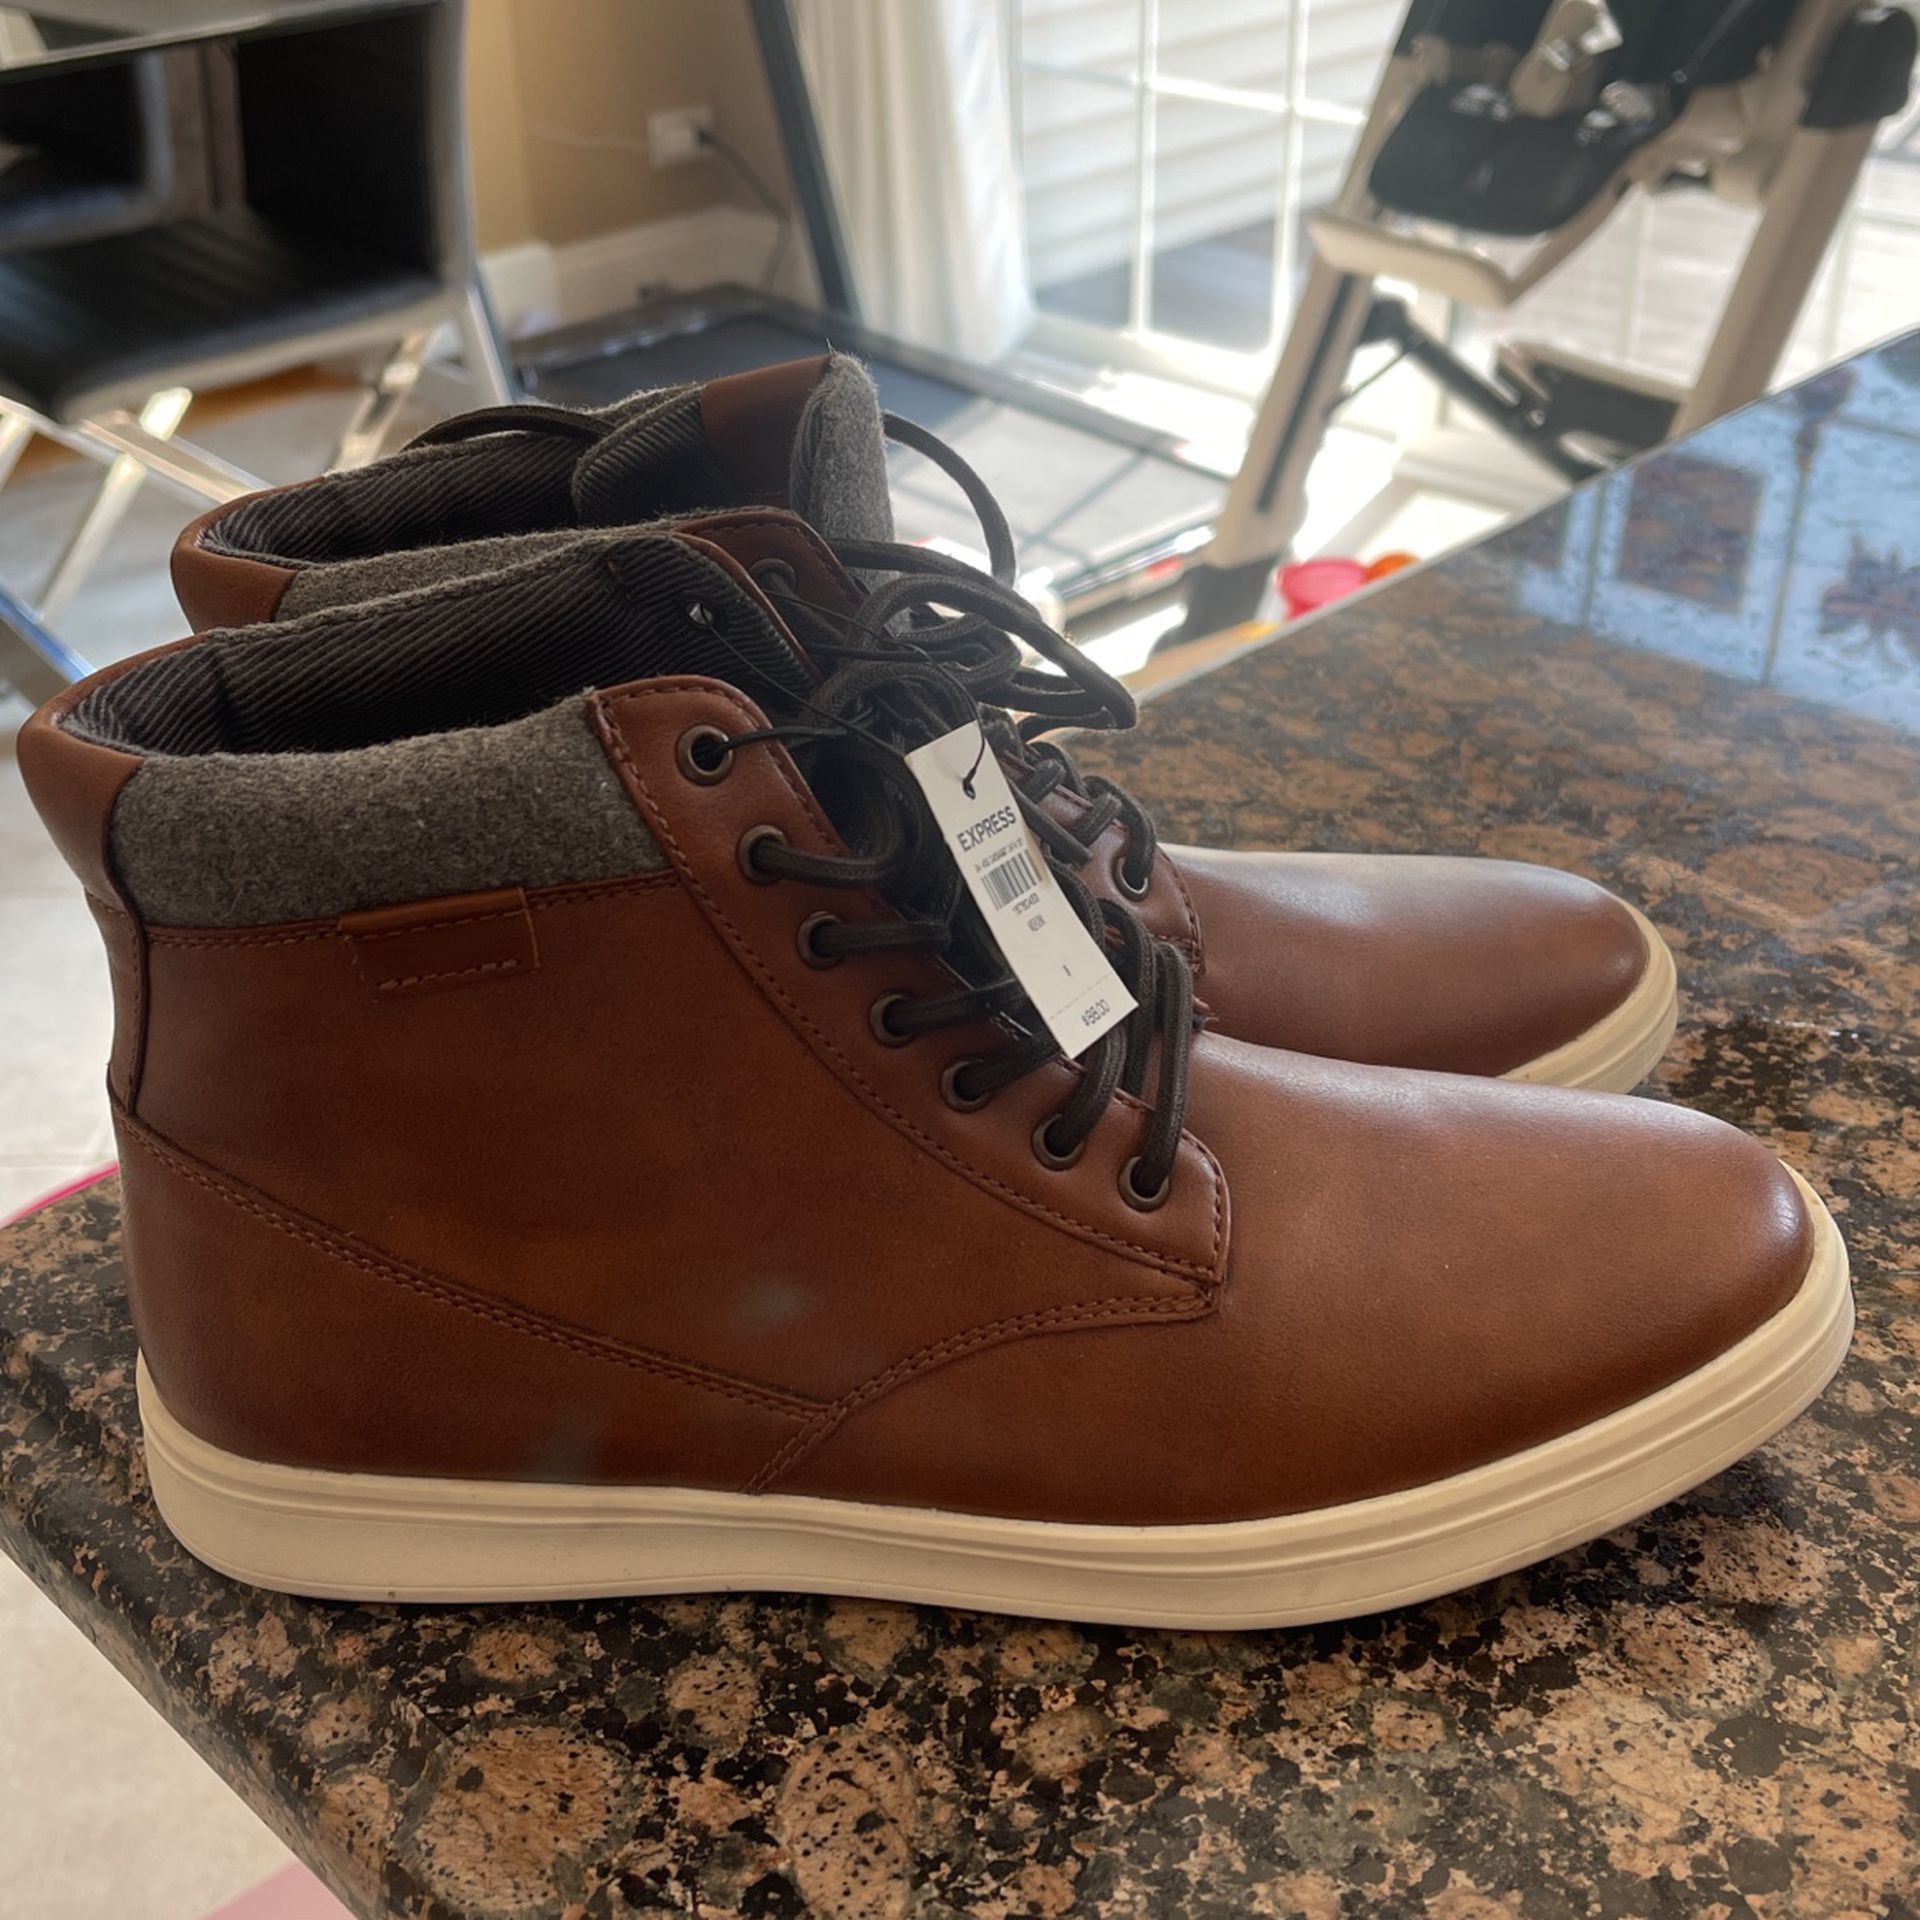 Brand new Shoes | Express Men’s - Size 9